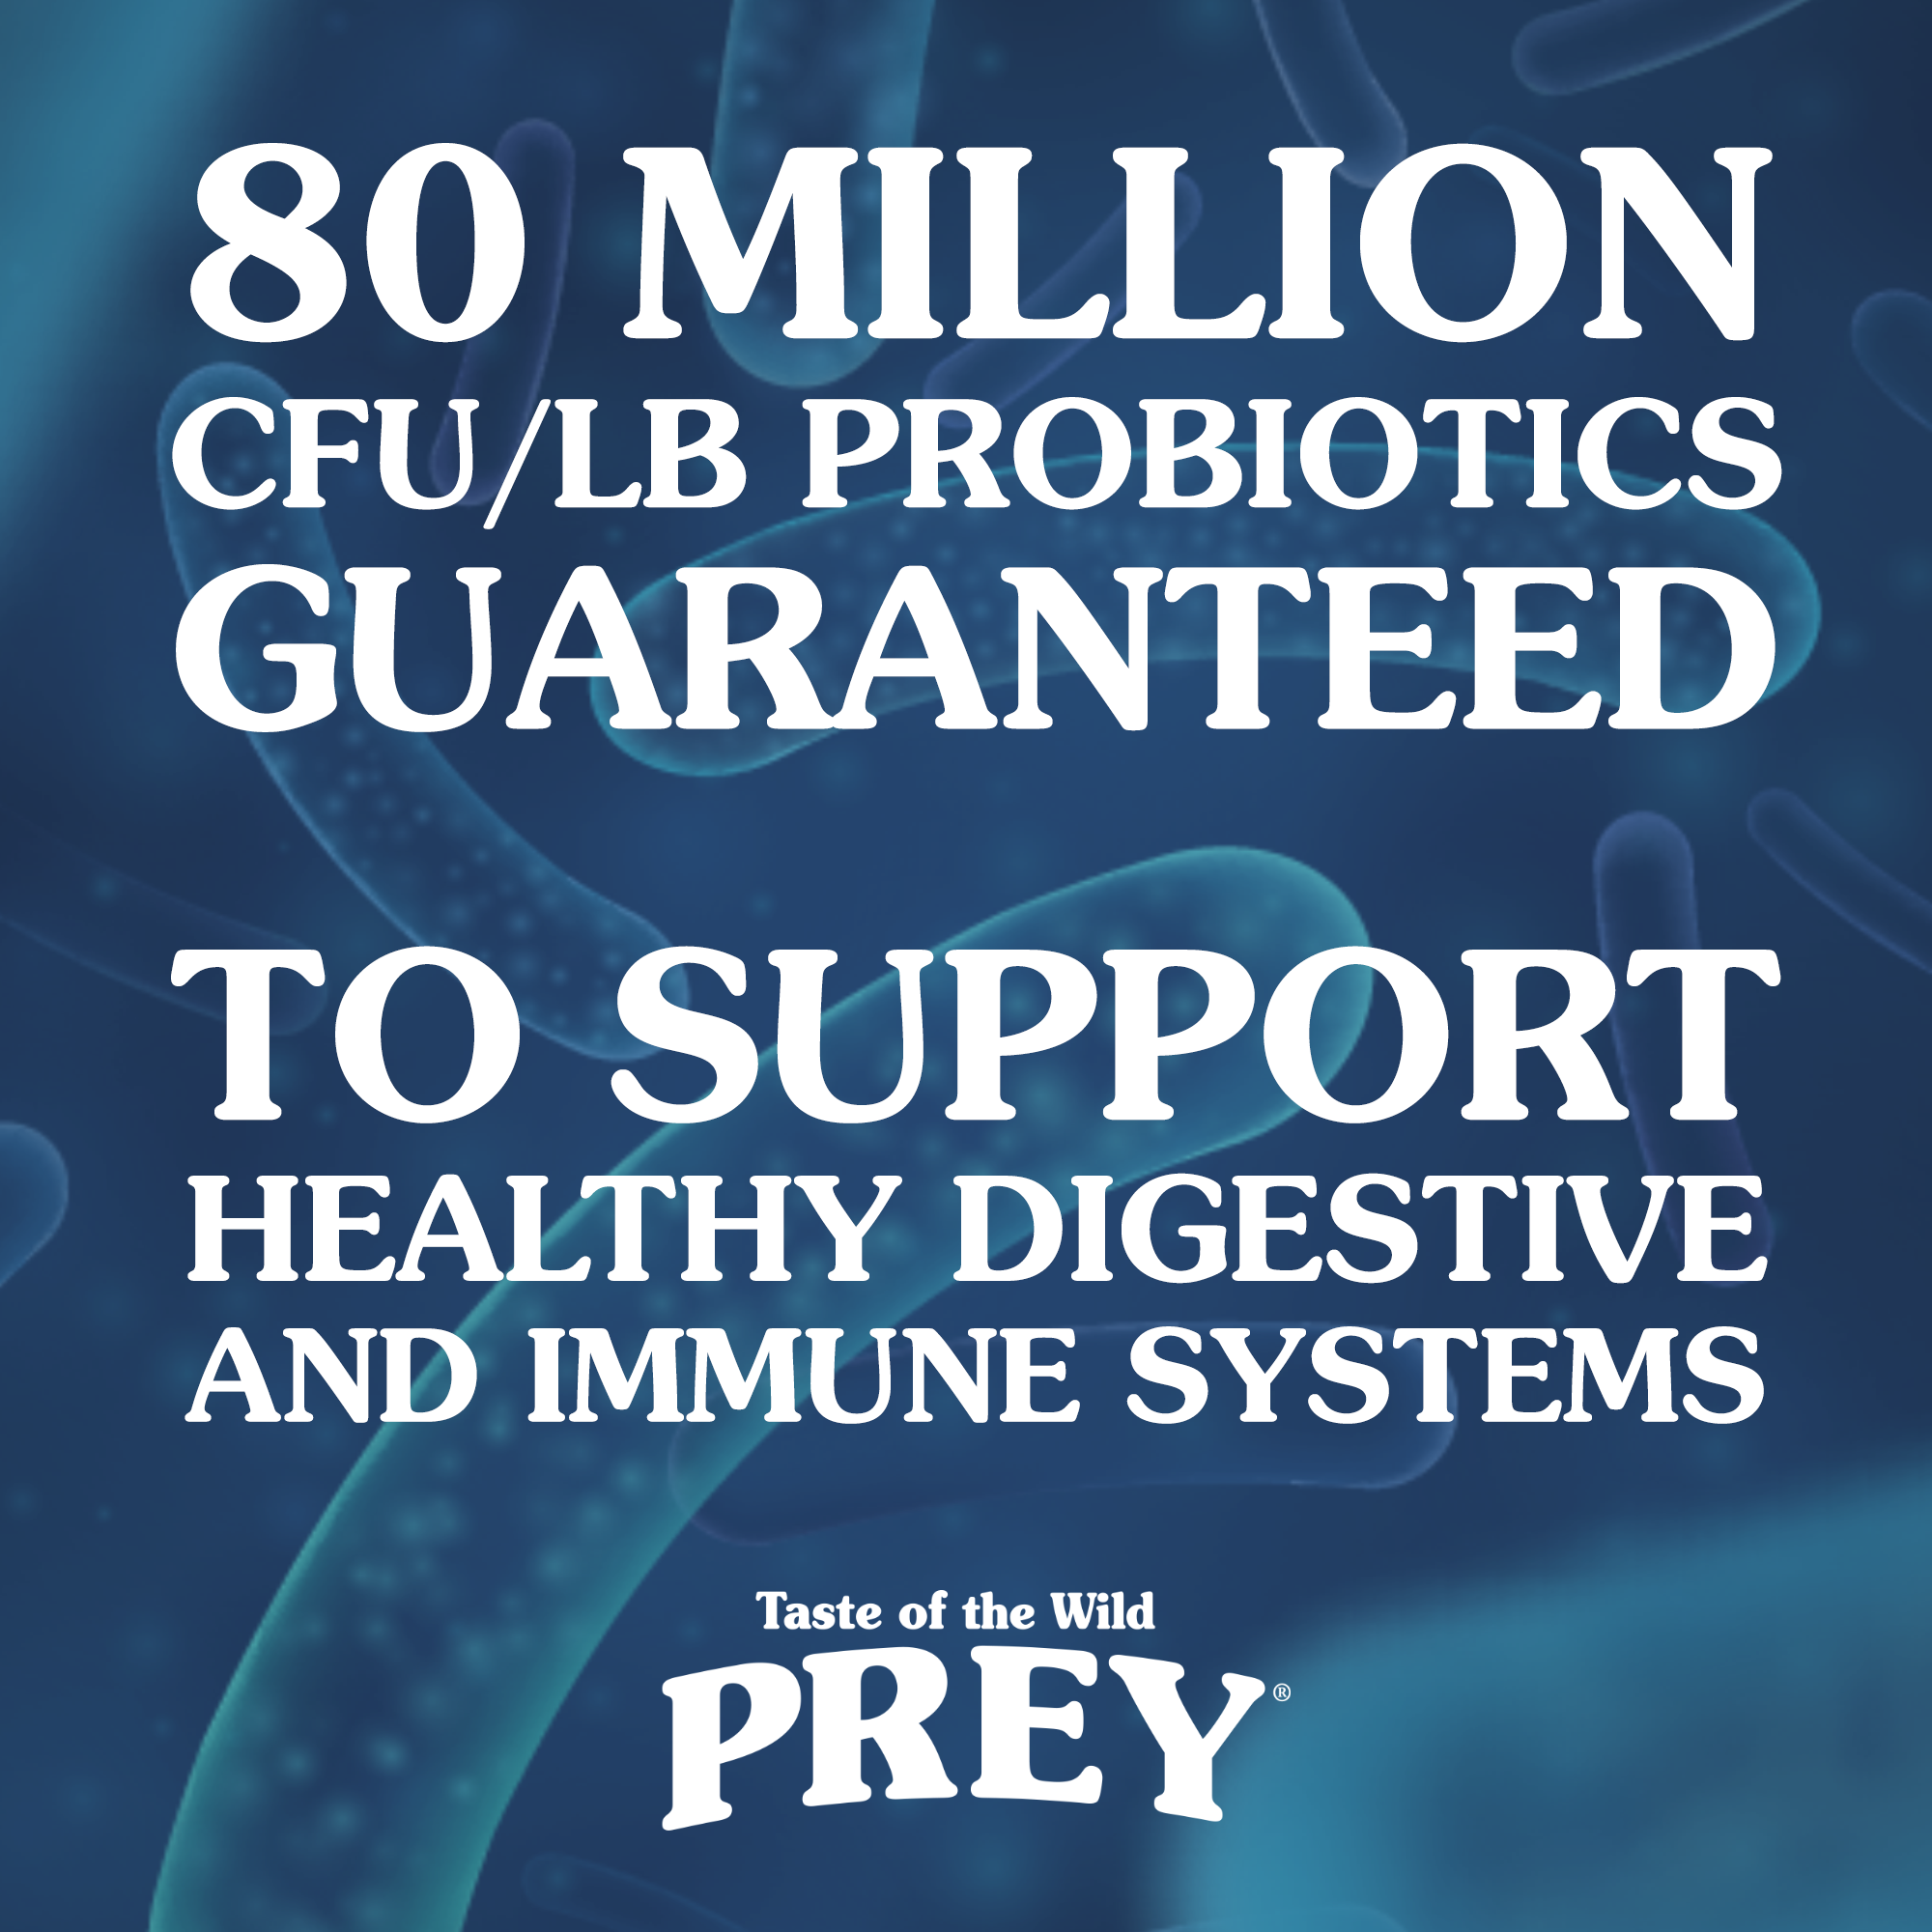 80 Million CFU/LB Probiotics Guaranteed. To support healthy digestive and immune systems.